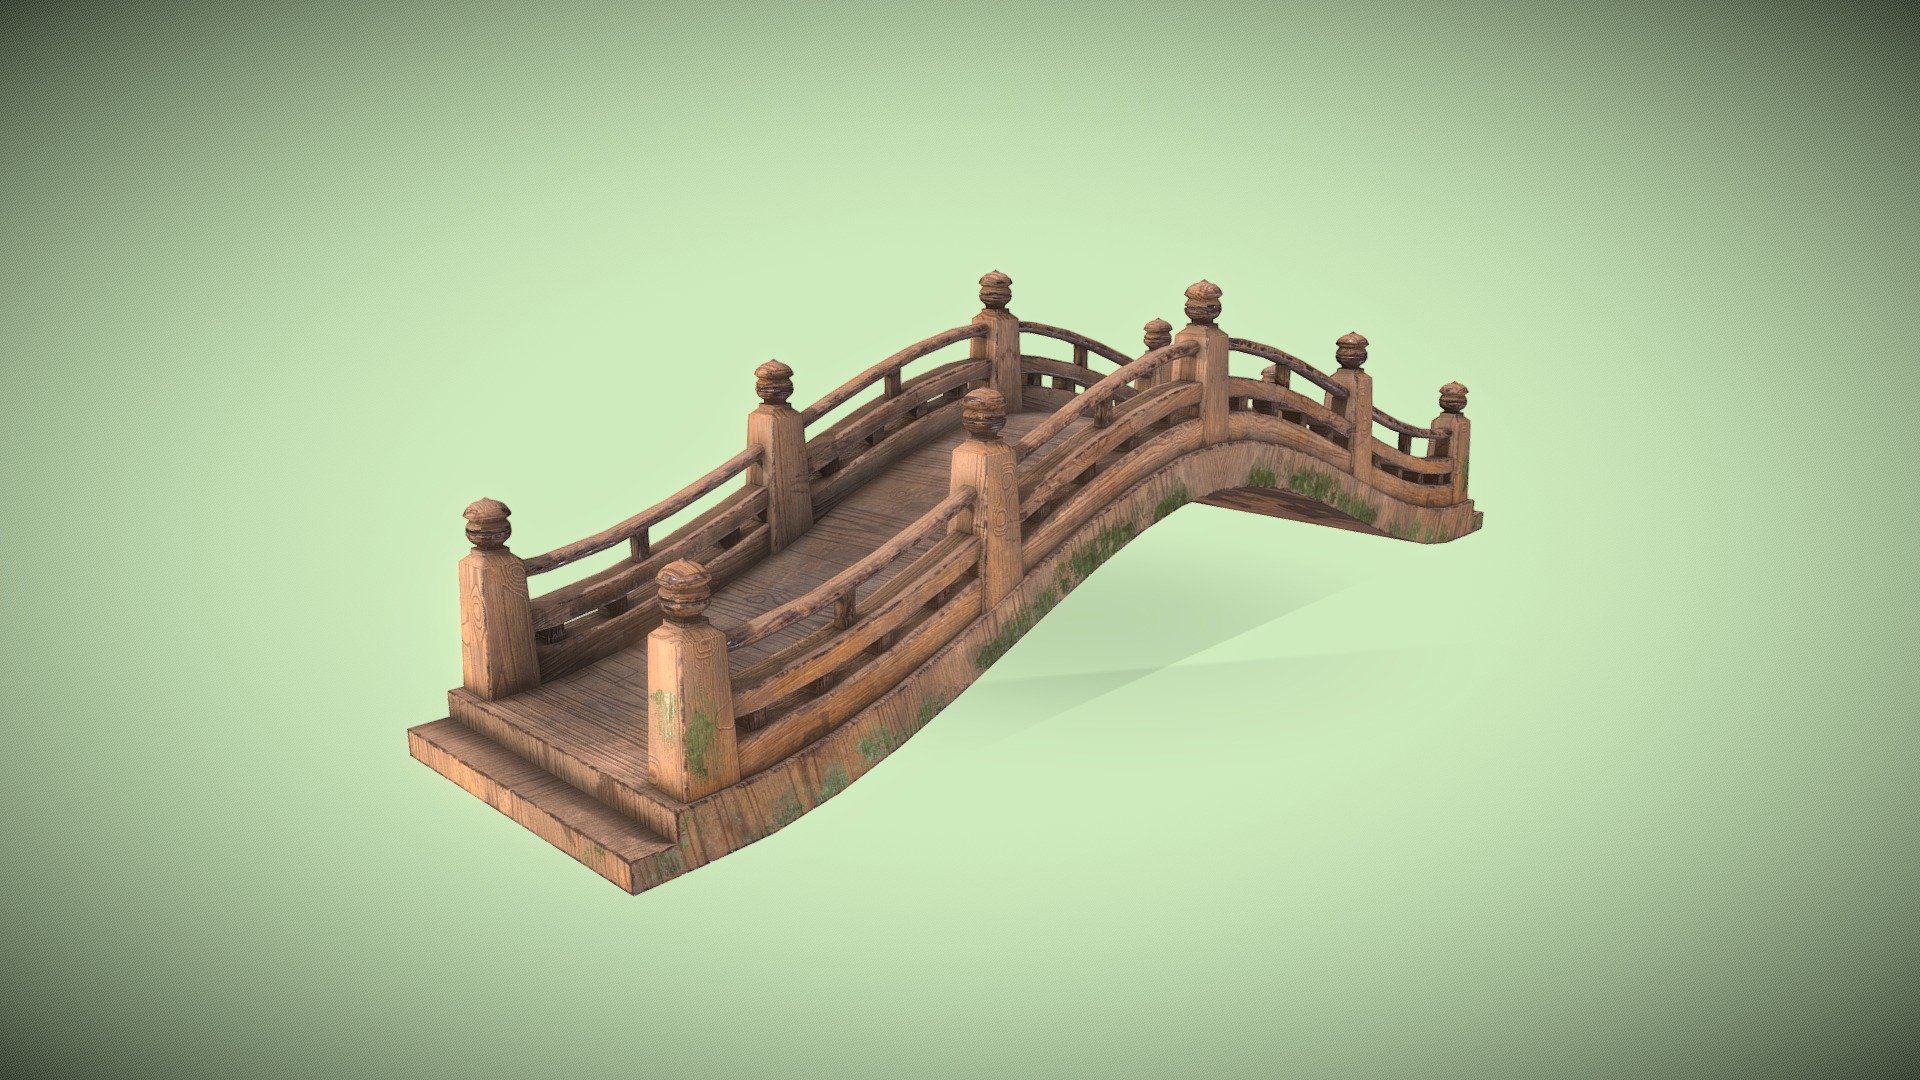 I made that for my personal unreal 5 project. I never finish that project but ı want to share that bridge 3d model